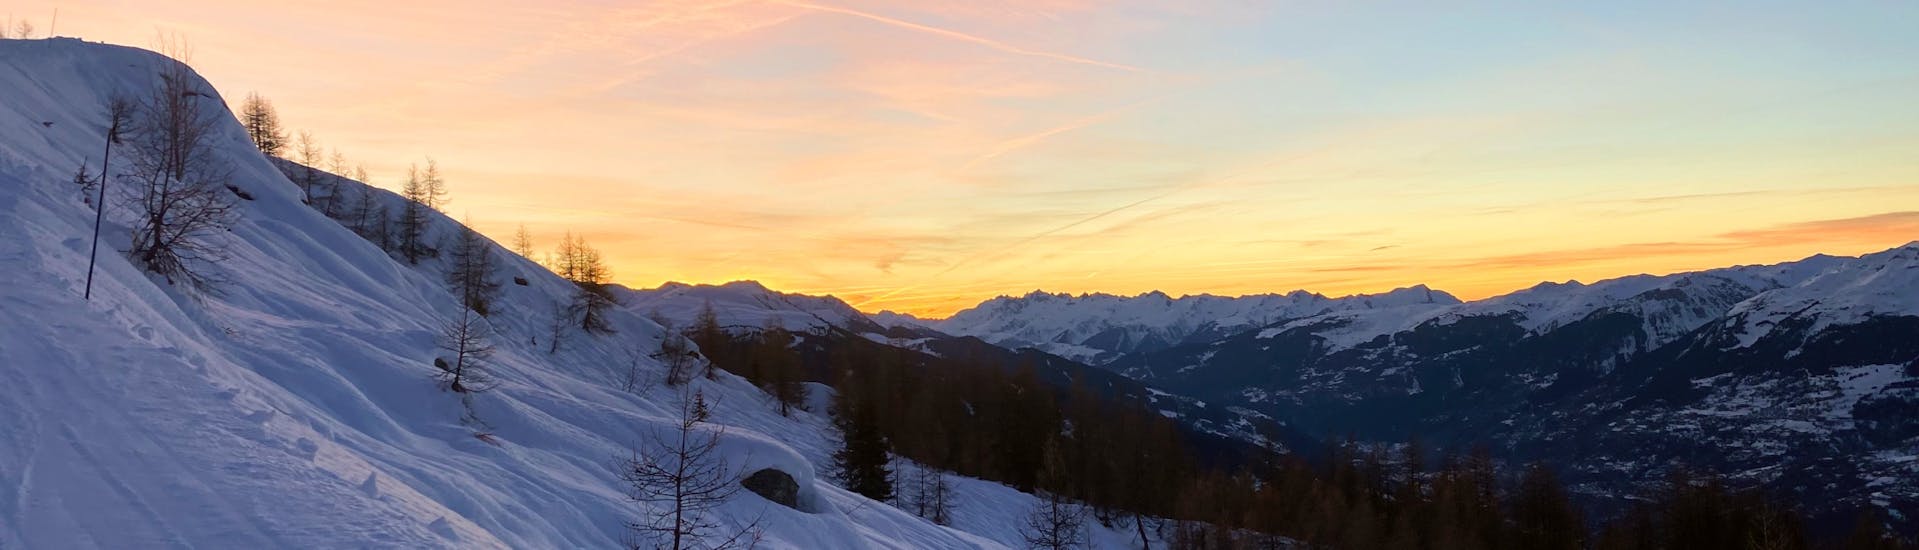 View of the snowy landscape you can see during an Introduction to Ski Touring at Sunset with Evolution 2 Peisey-Vallandry.